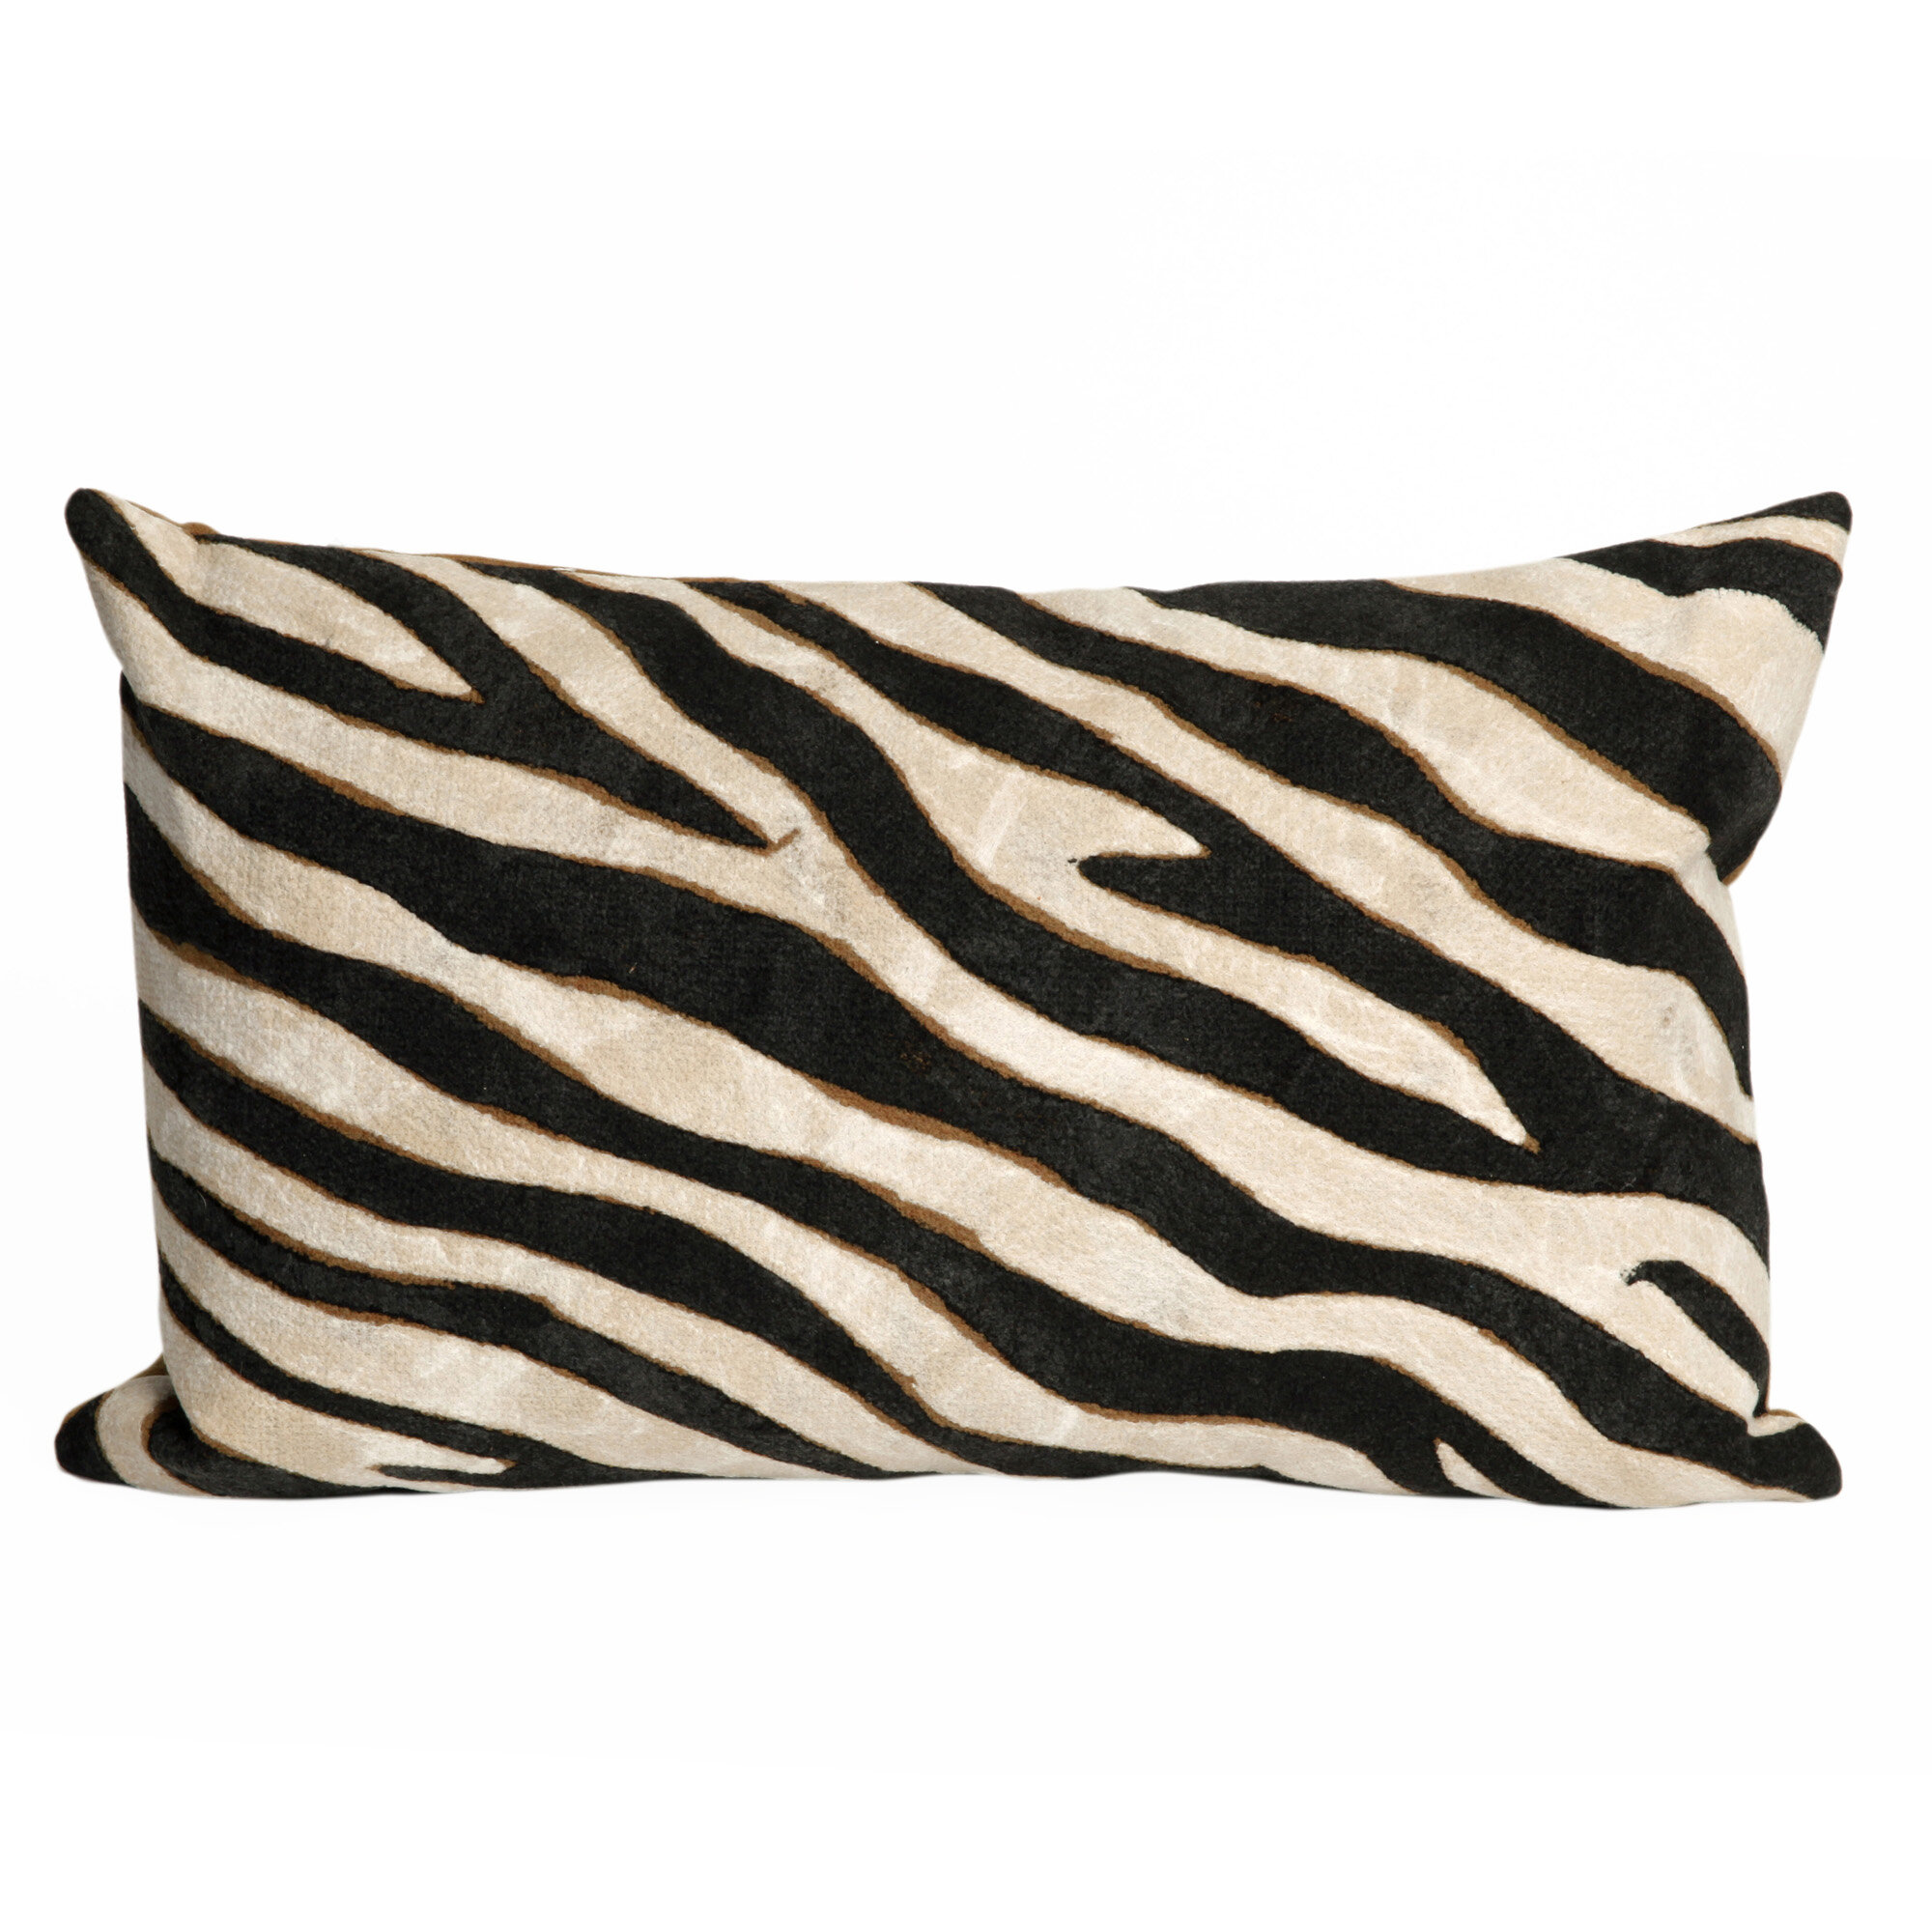 E by design Fish Pool Animal Print Outdoor Pillow 20 x 20 Brown 